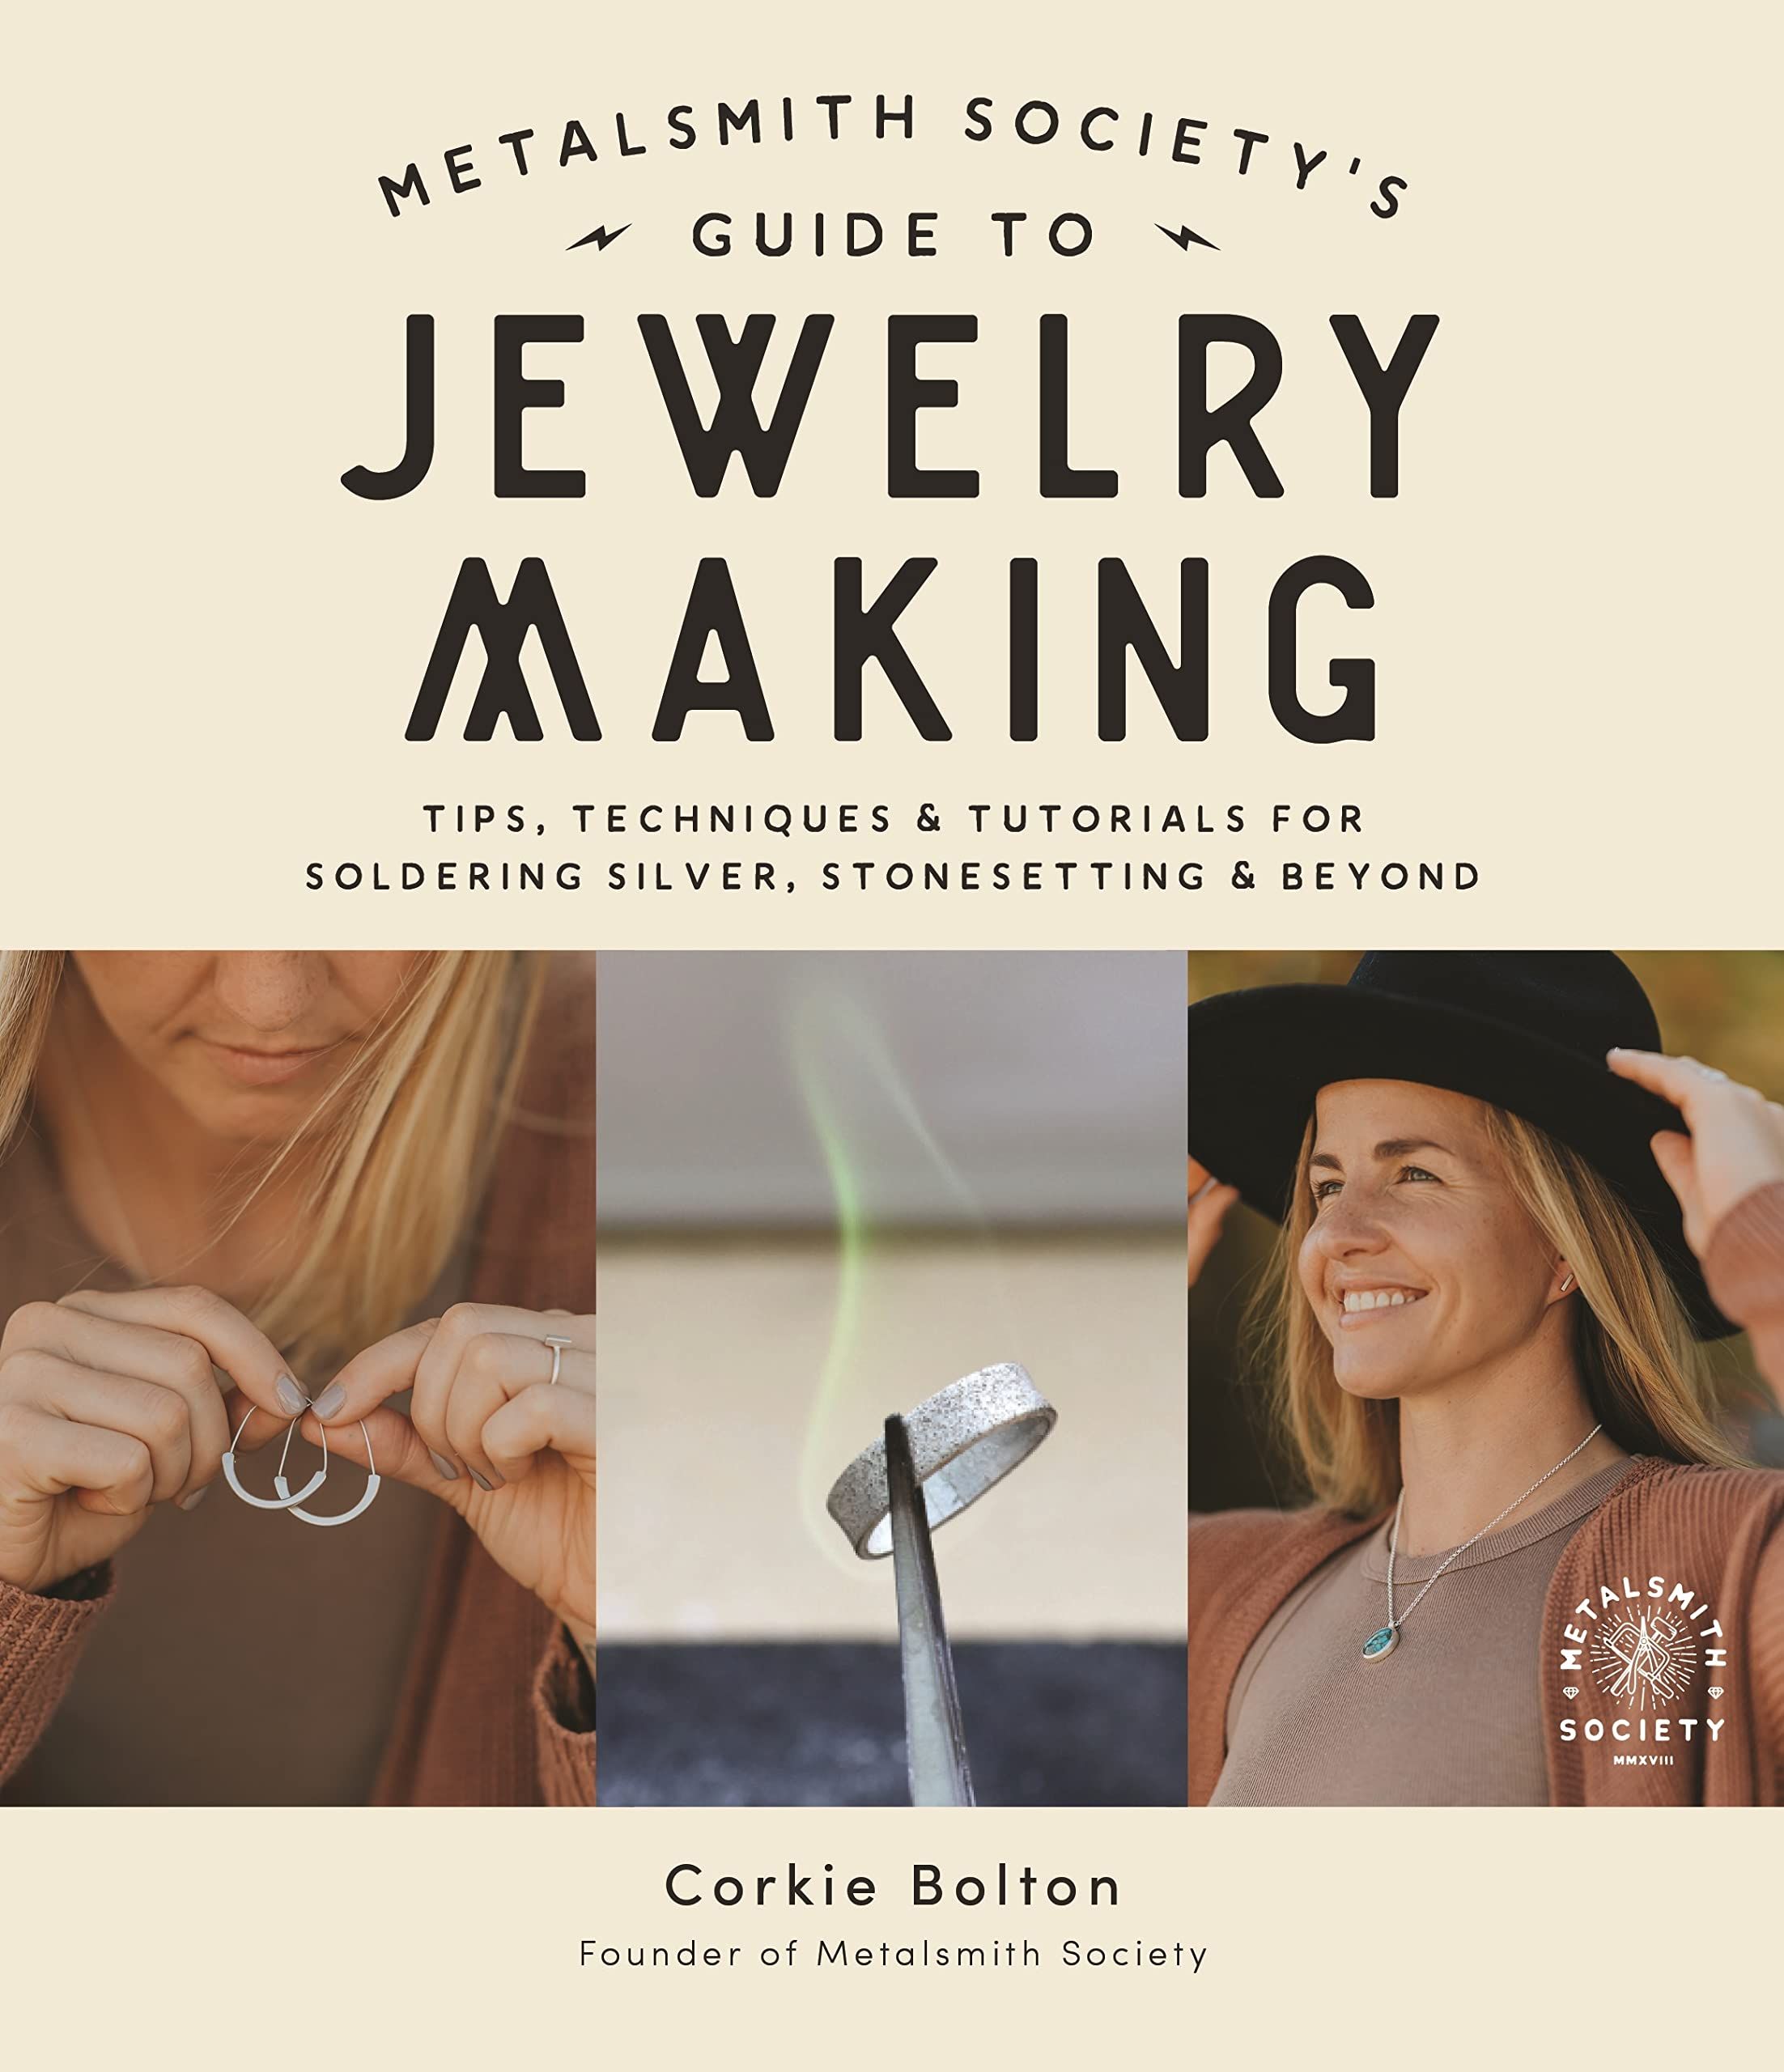 Metalsmith Guide to Jewelry Making book cover